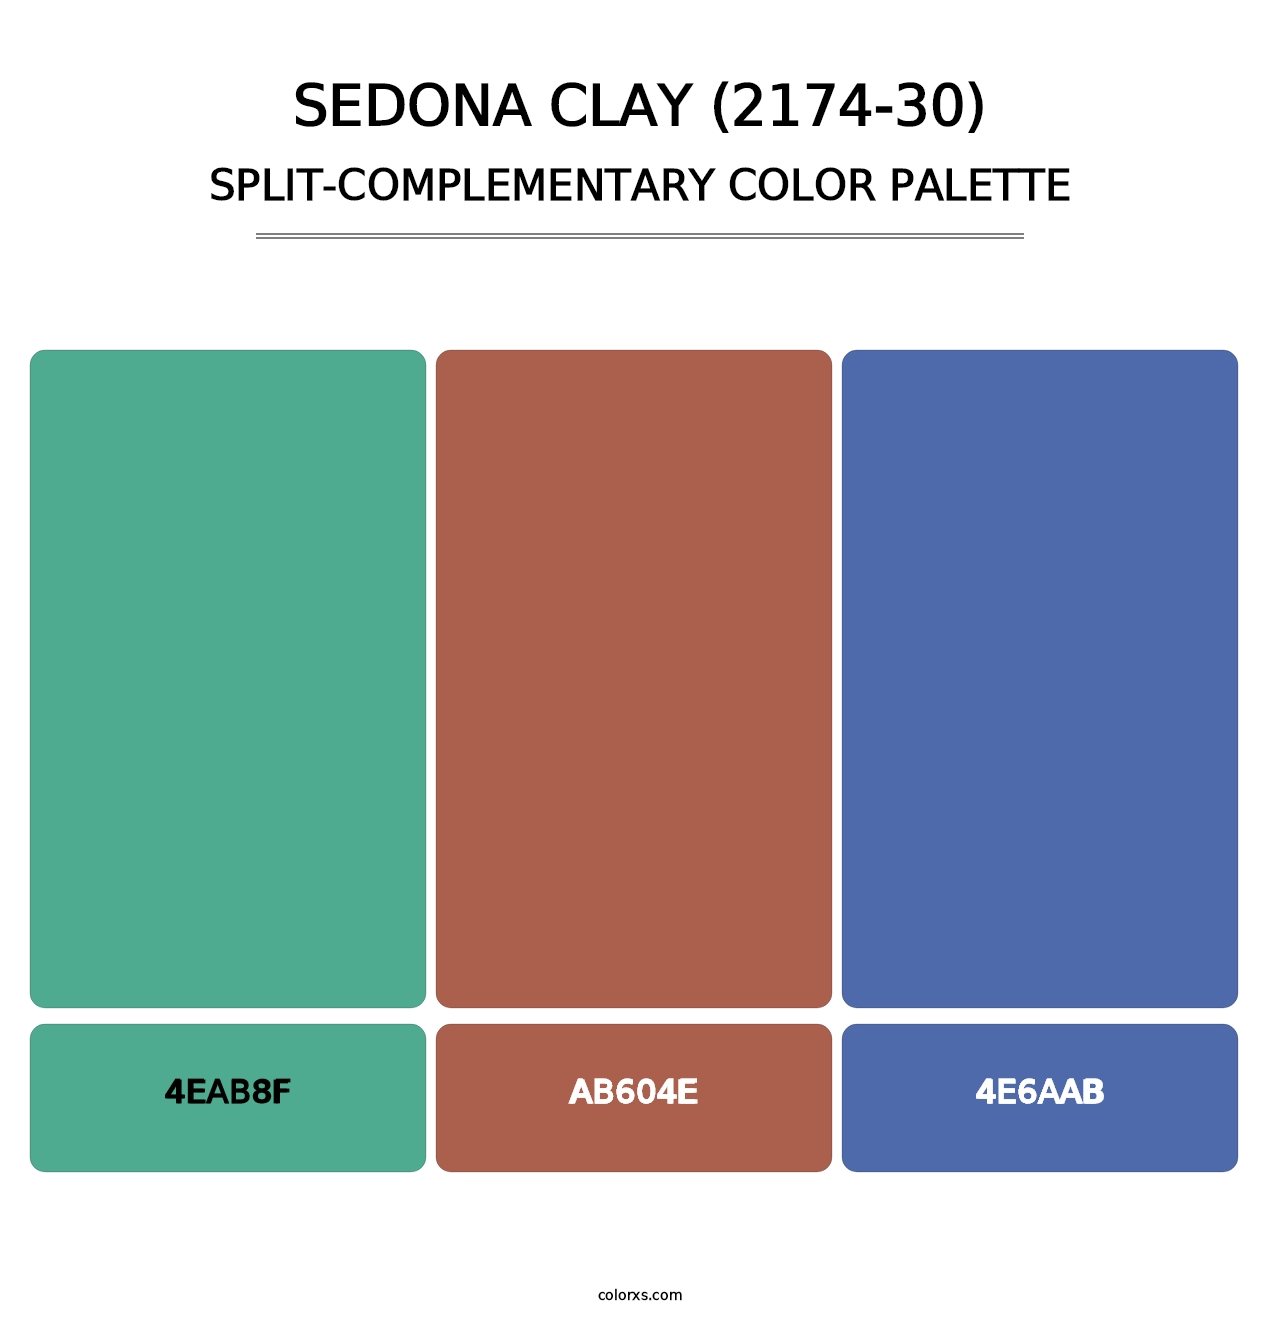 Sedona Clay (2174-30) - Split-Complementary Color Palette